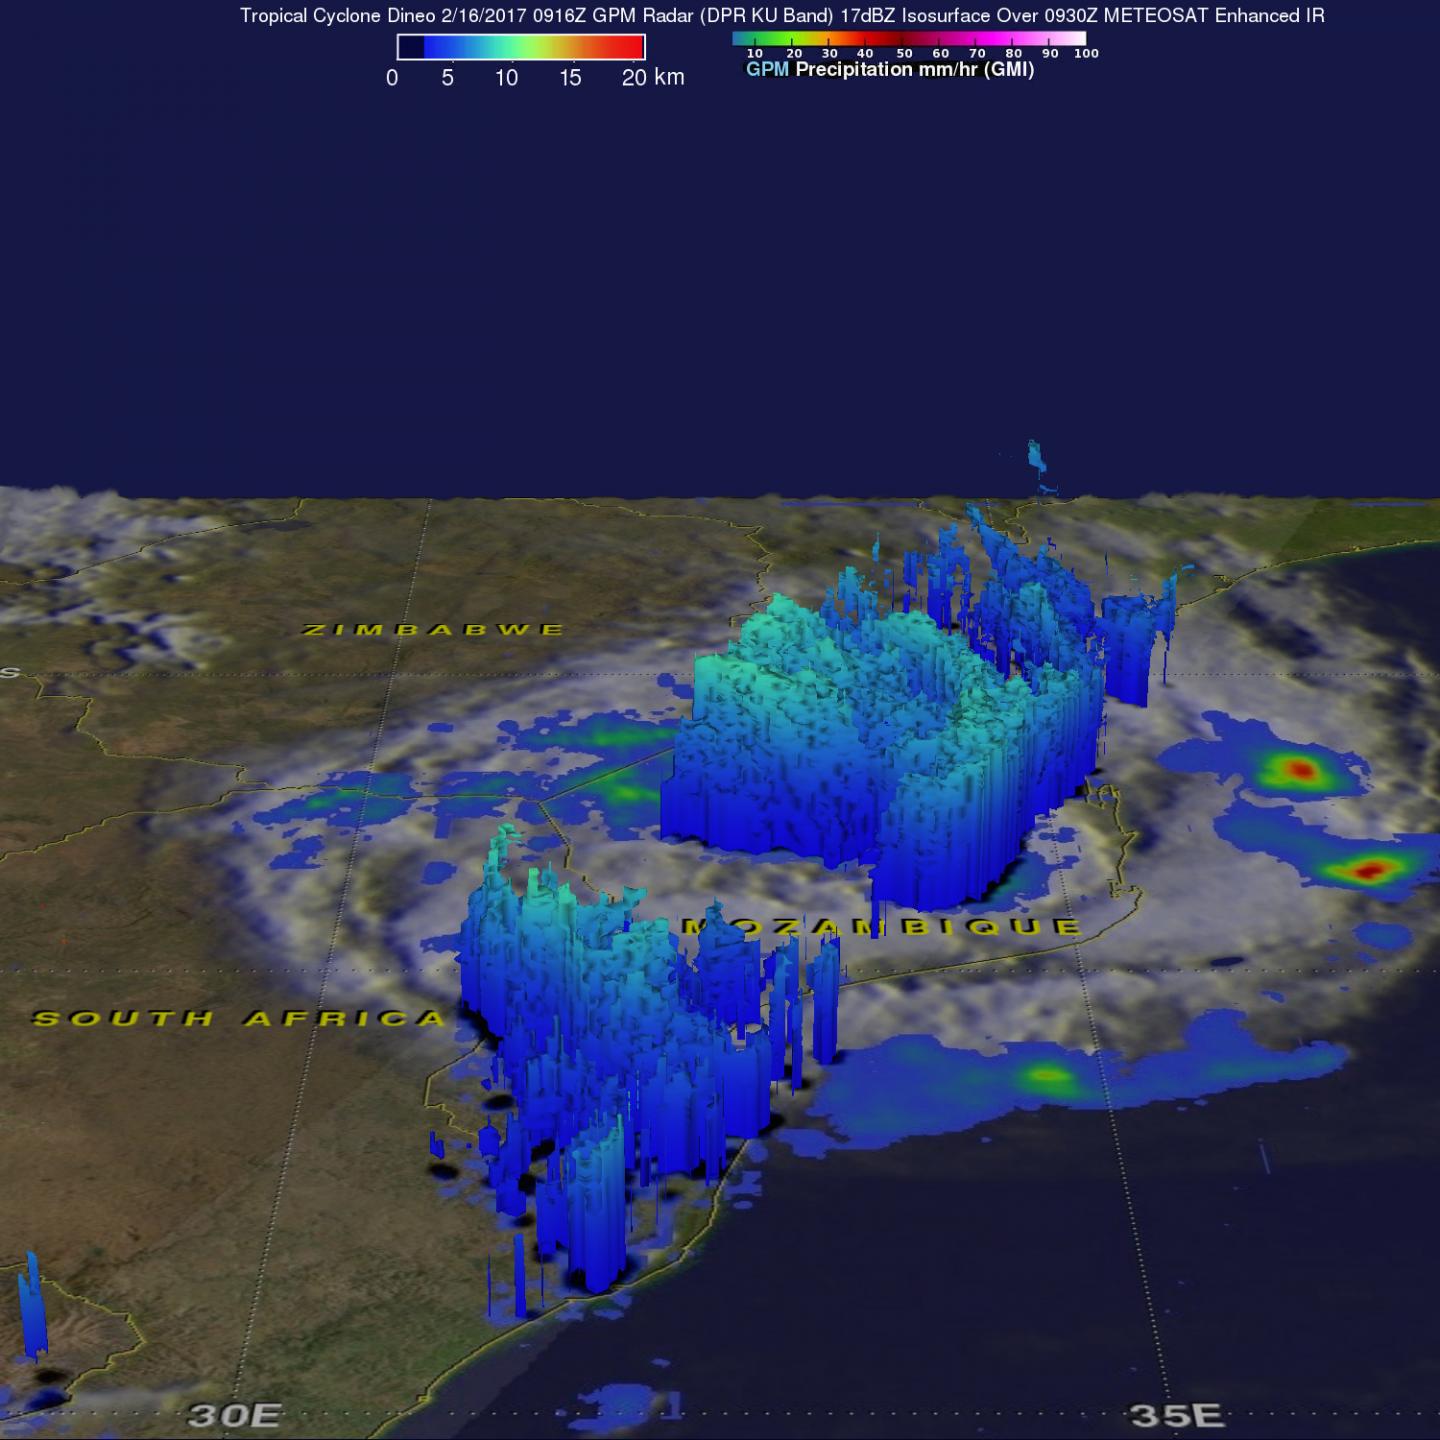 GPM Image of Dineo